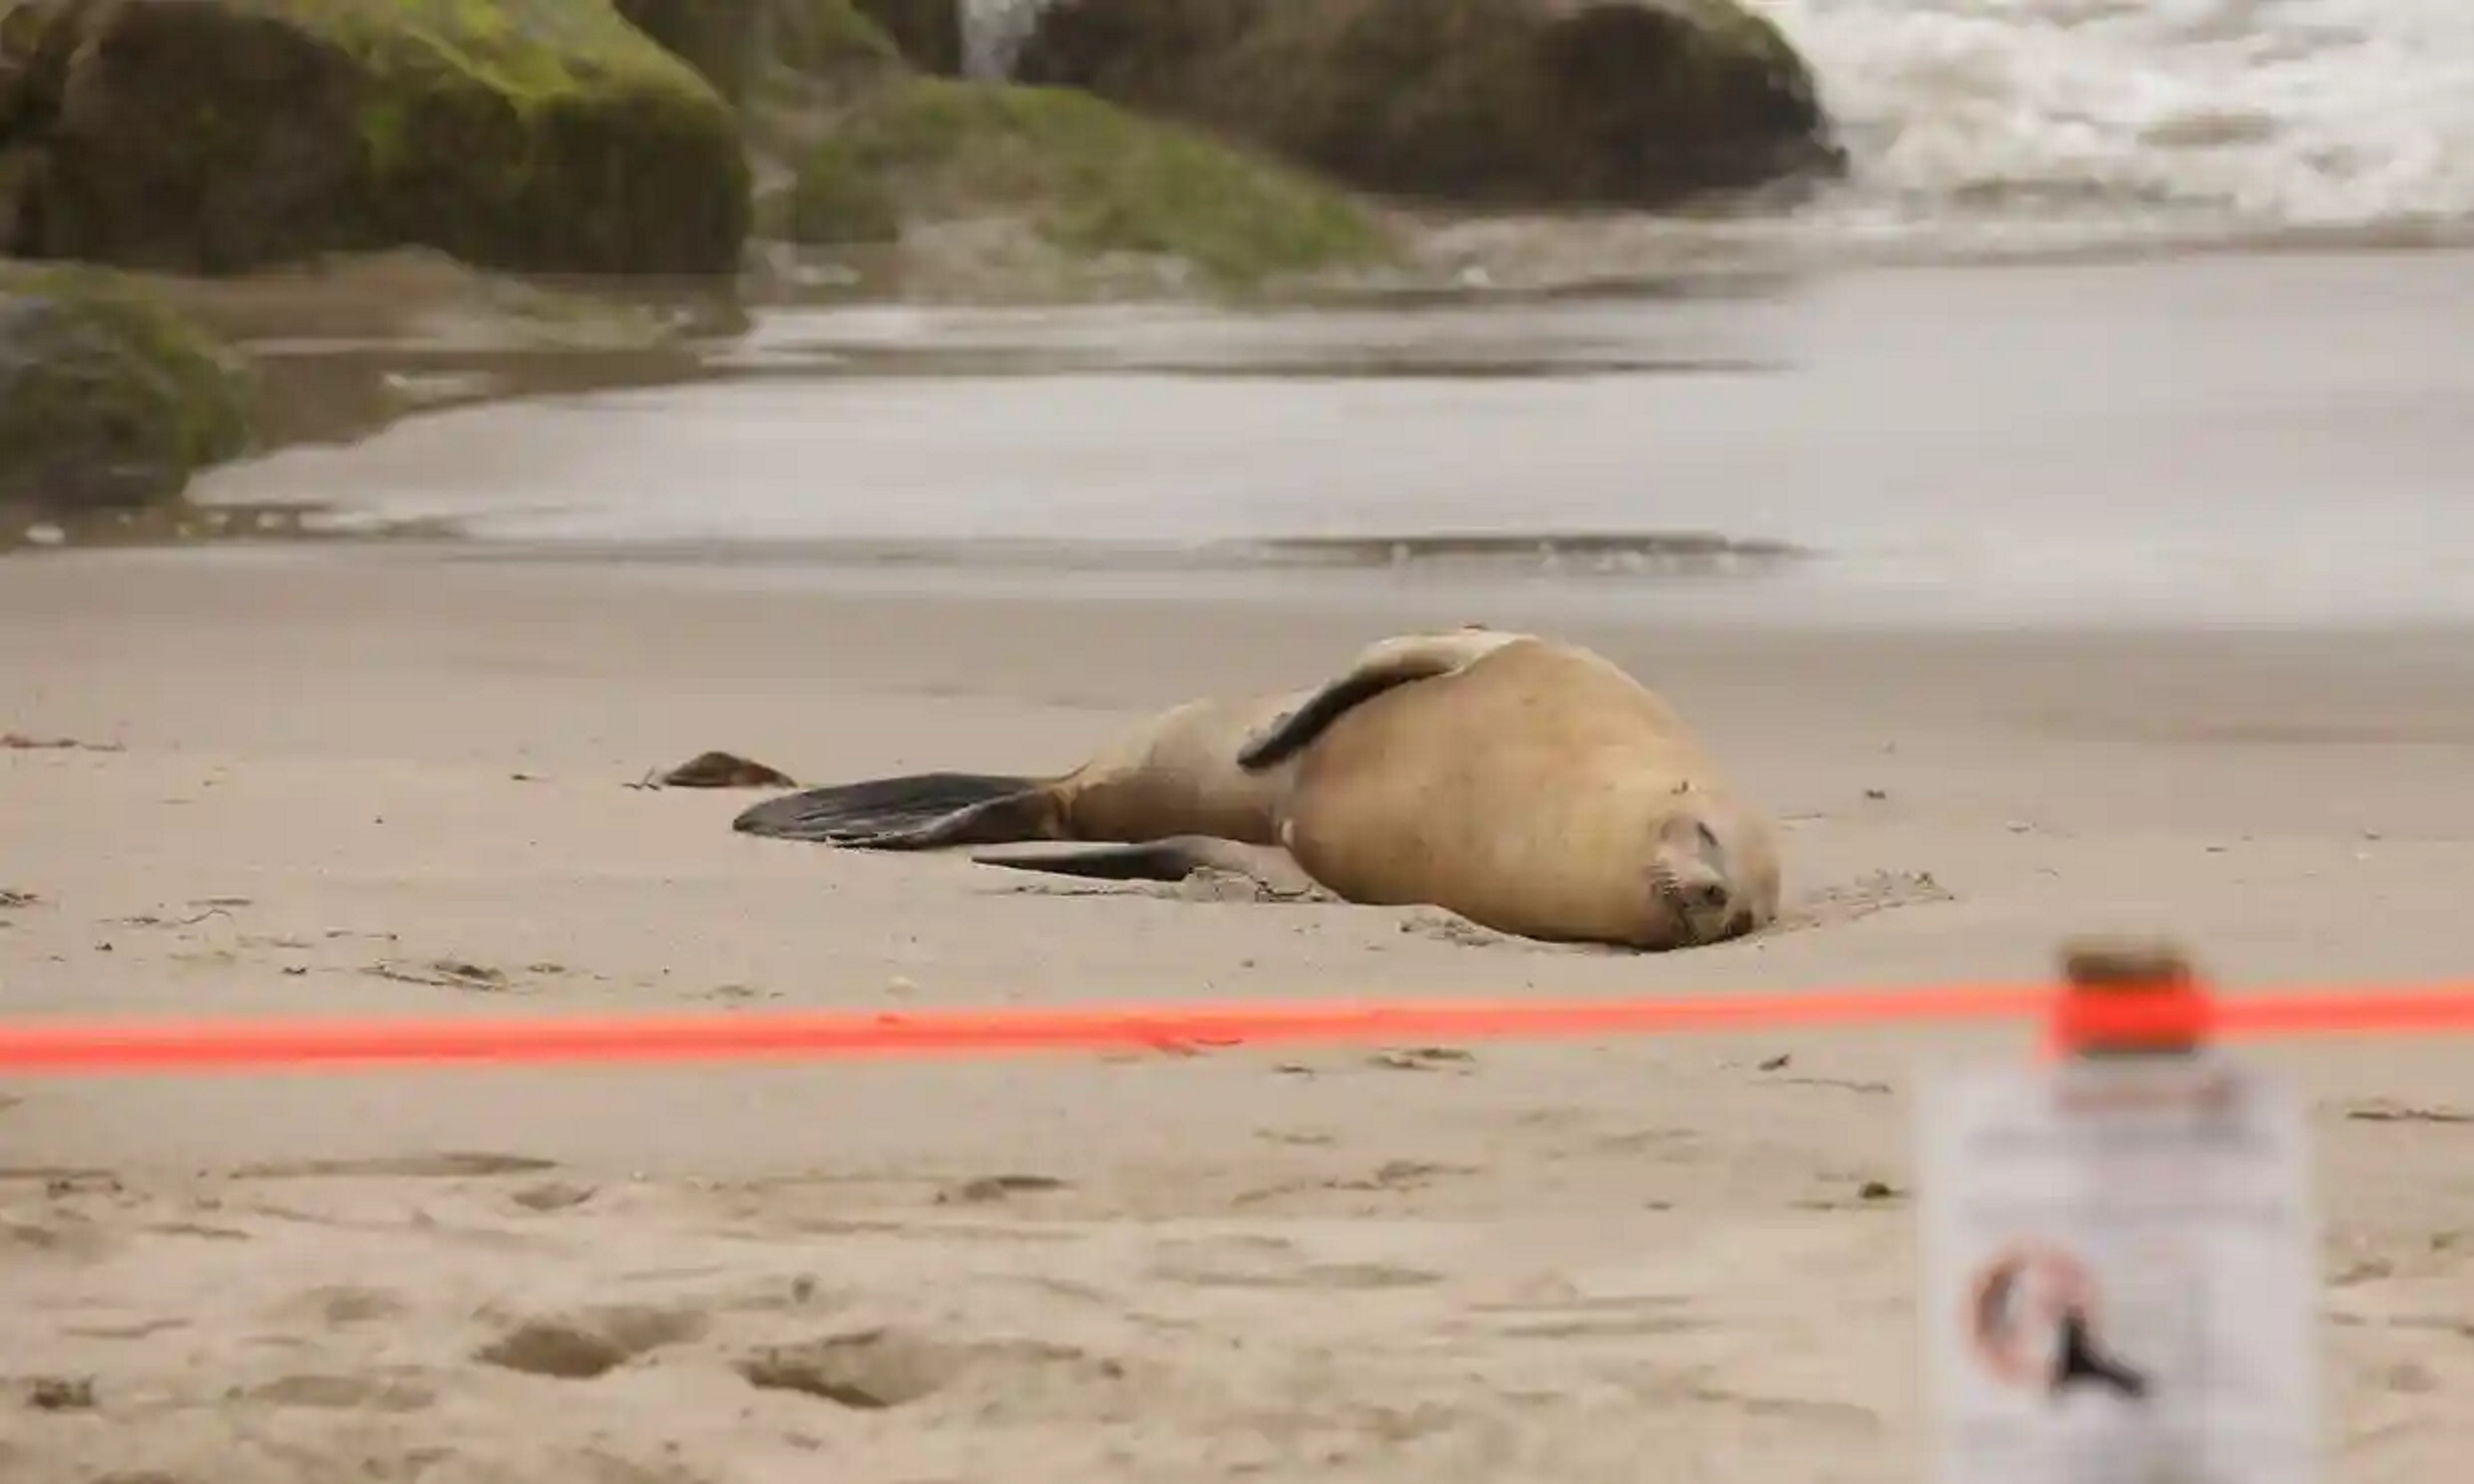 A sea lion with apparent domoic acid poisoning lies on a beach in Ventura, California in August 2022. Photo: David Swanson / Reuters